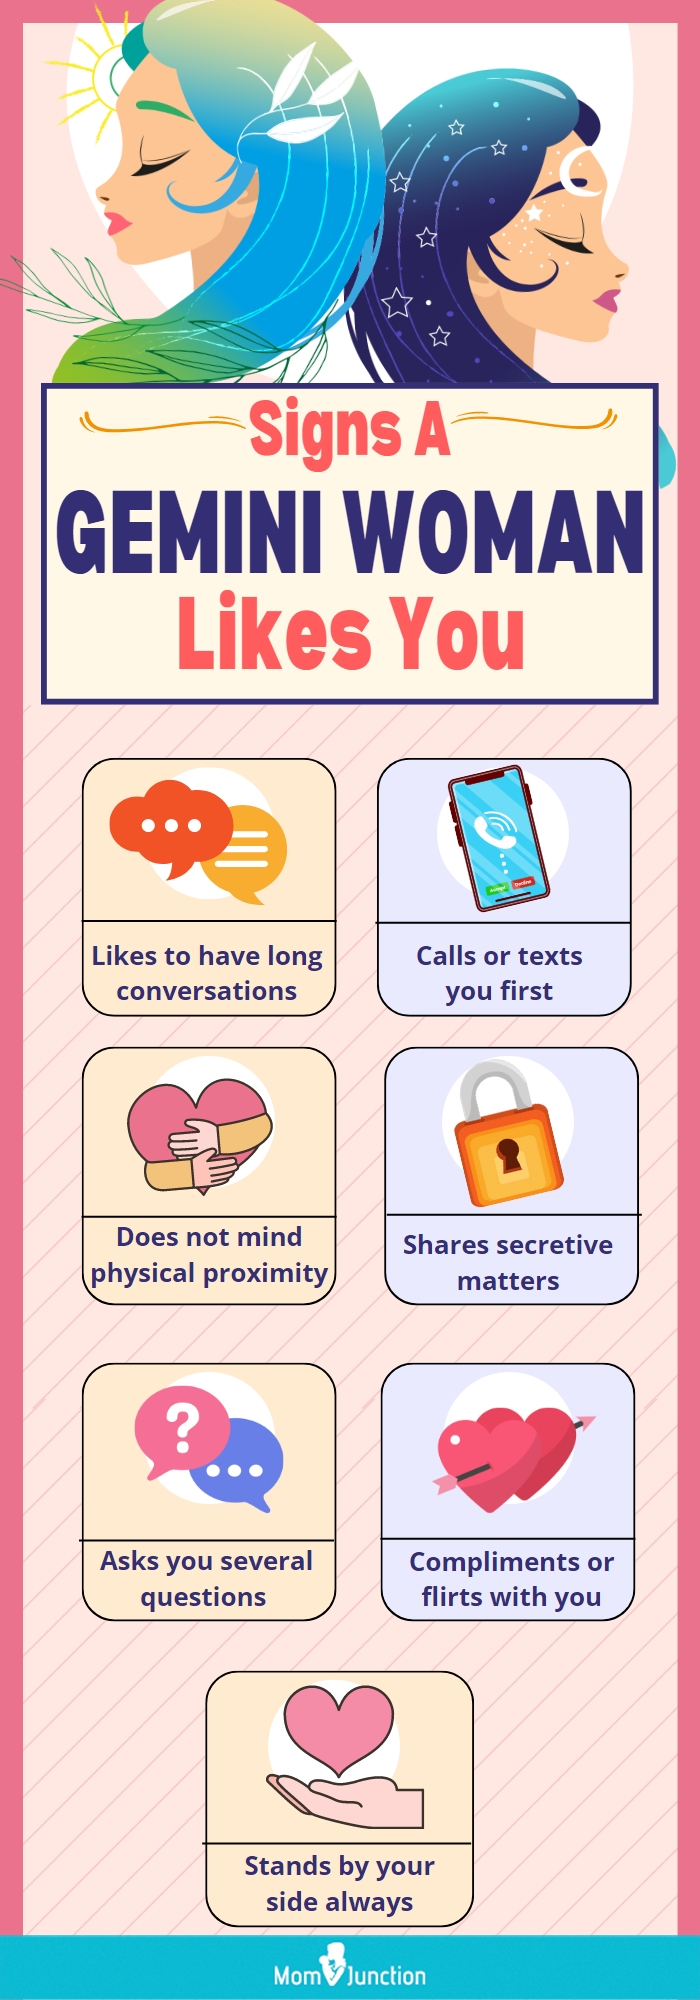 signs a gemini woman likes you (infographic)